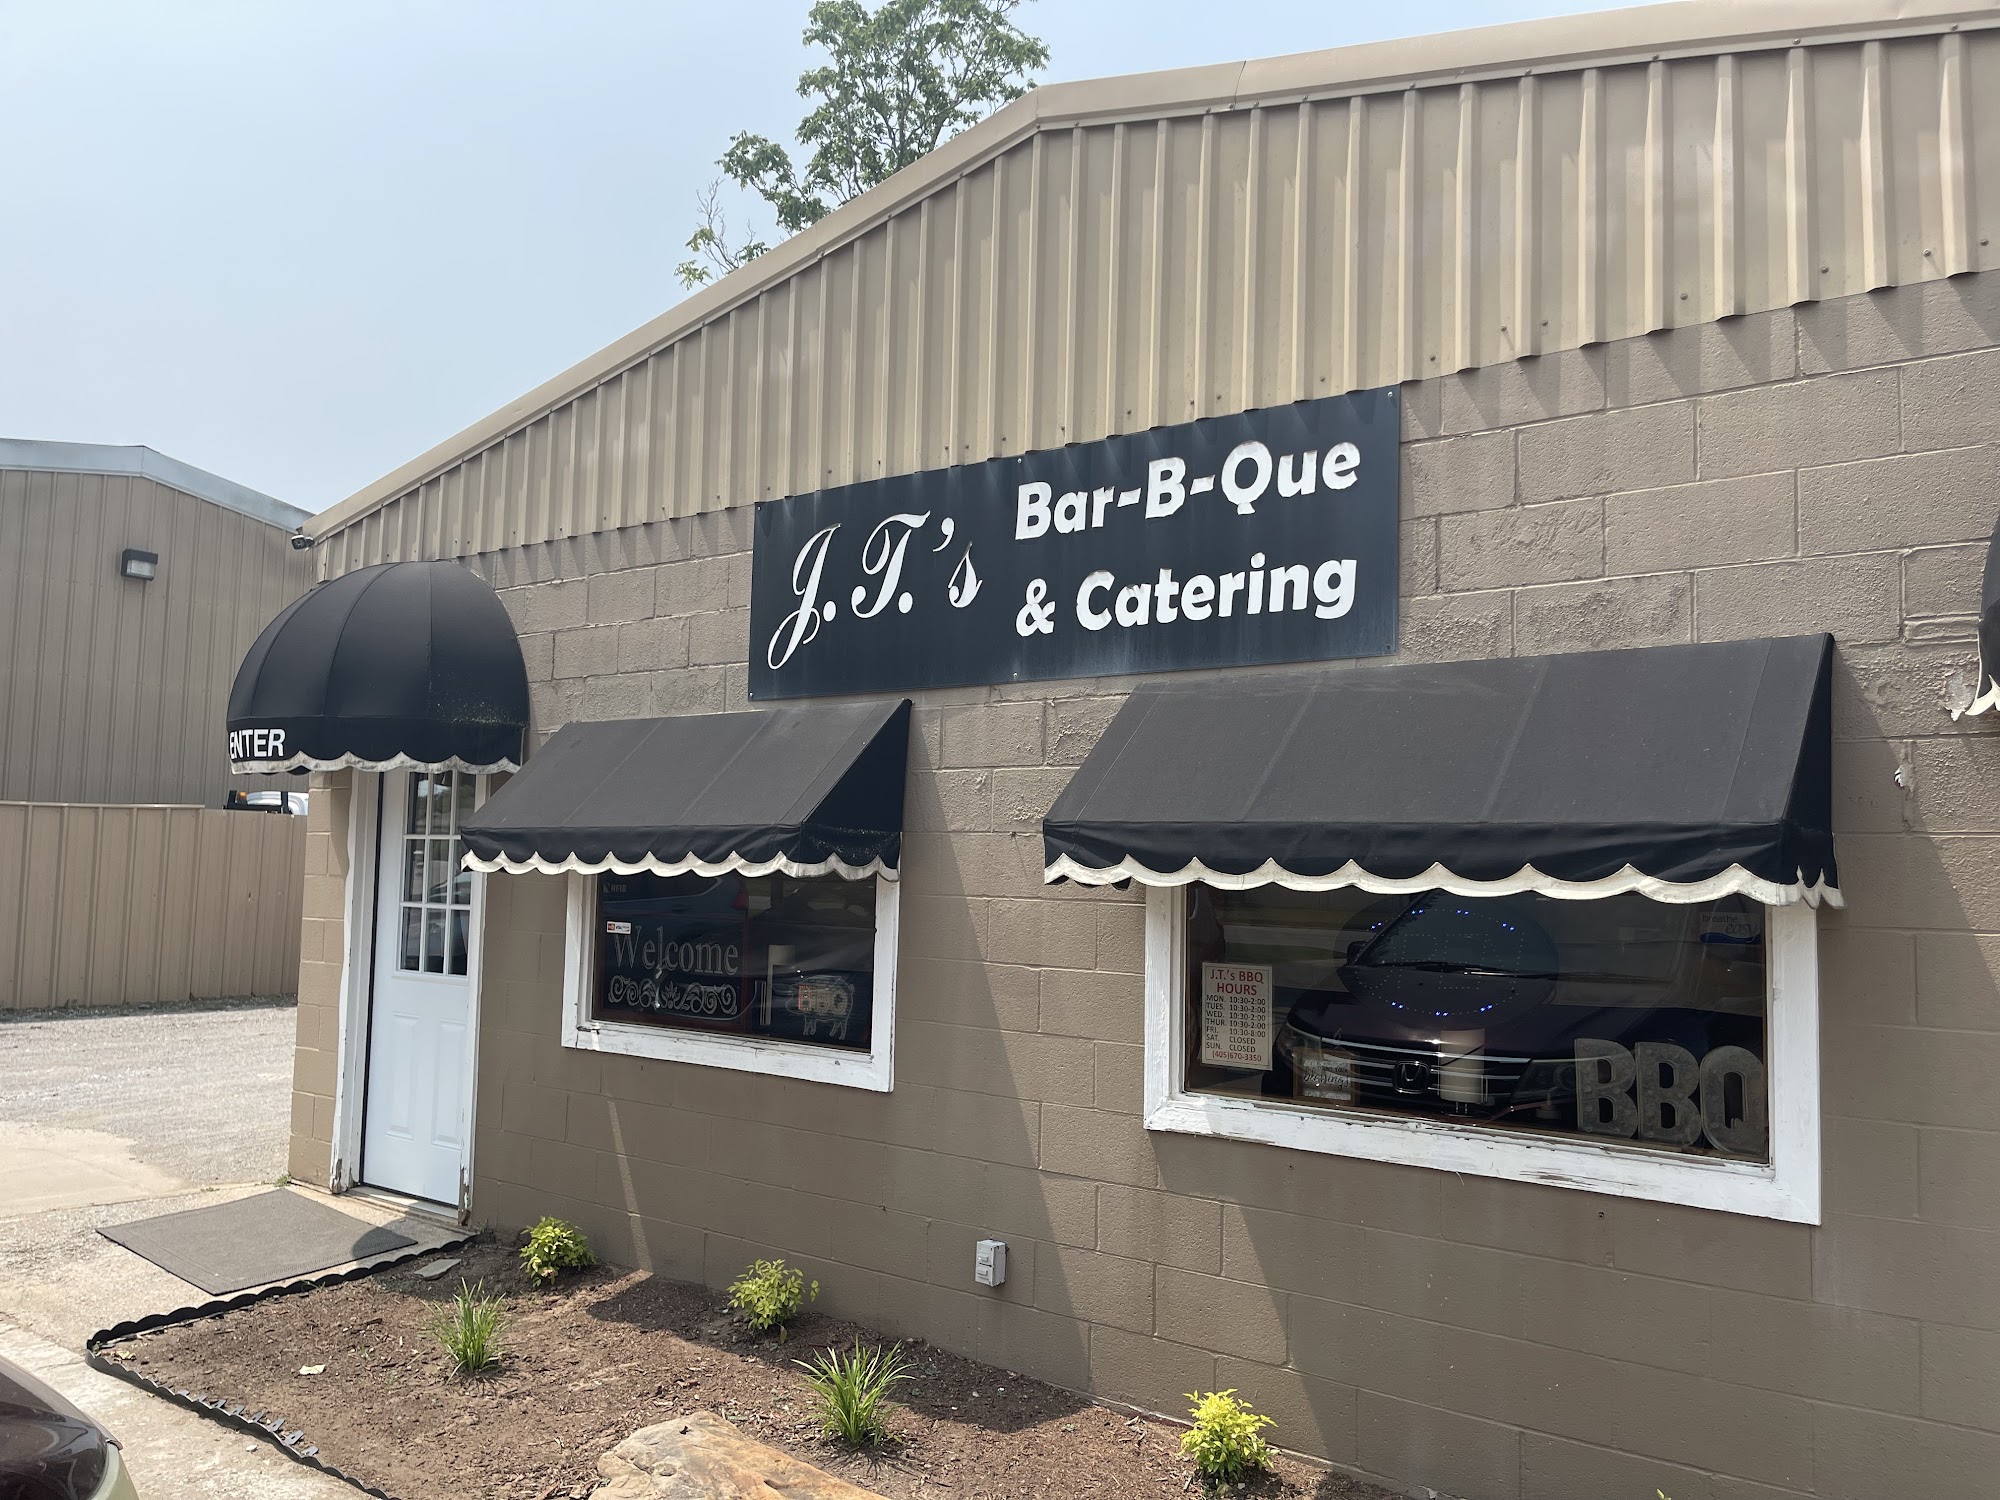 J.T.'s Barbeque and Catering